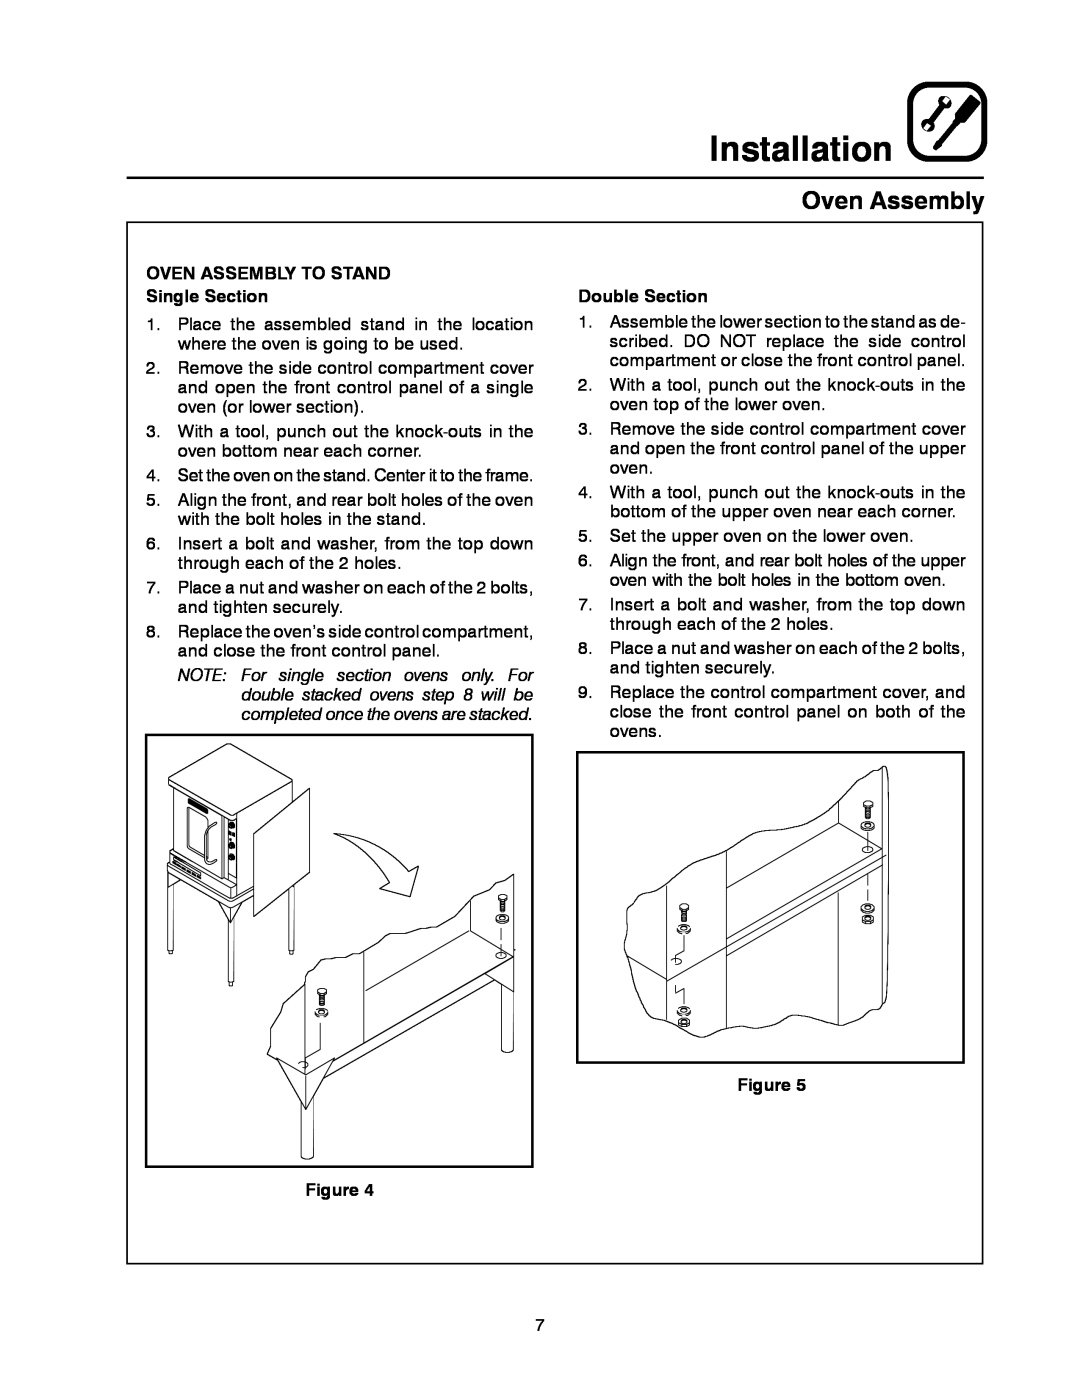 Blodgett DFG-50 manual Oven Assembly, Installation, OVEN ASSEMBLY TO STAND Single Section, Double Section 